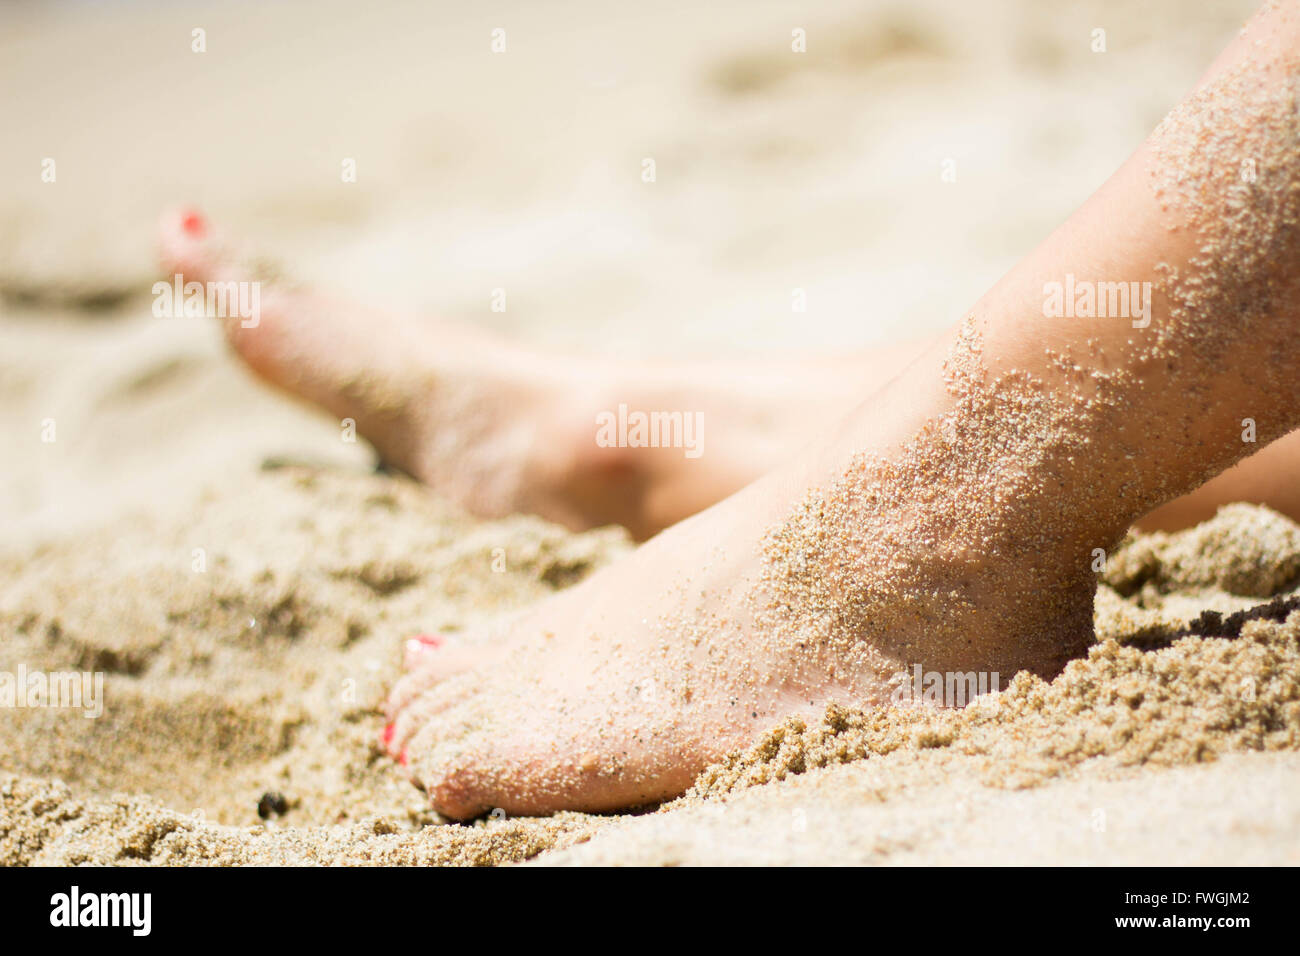 Close-Up View Of Woman's Legs On Beach Stock Photo